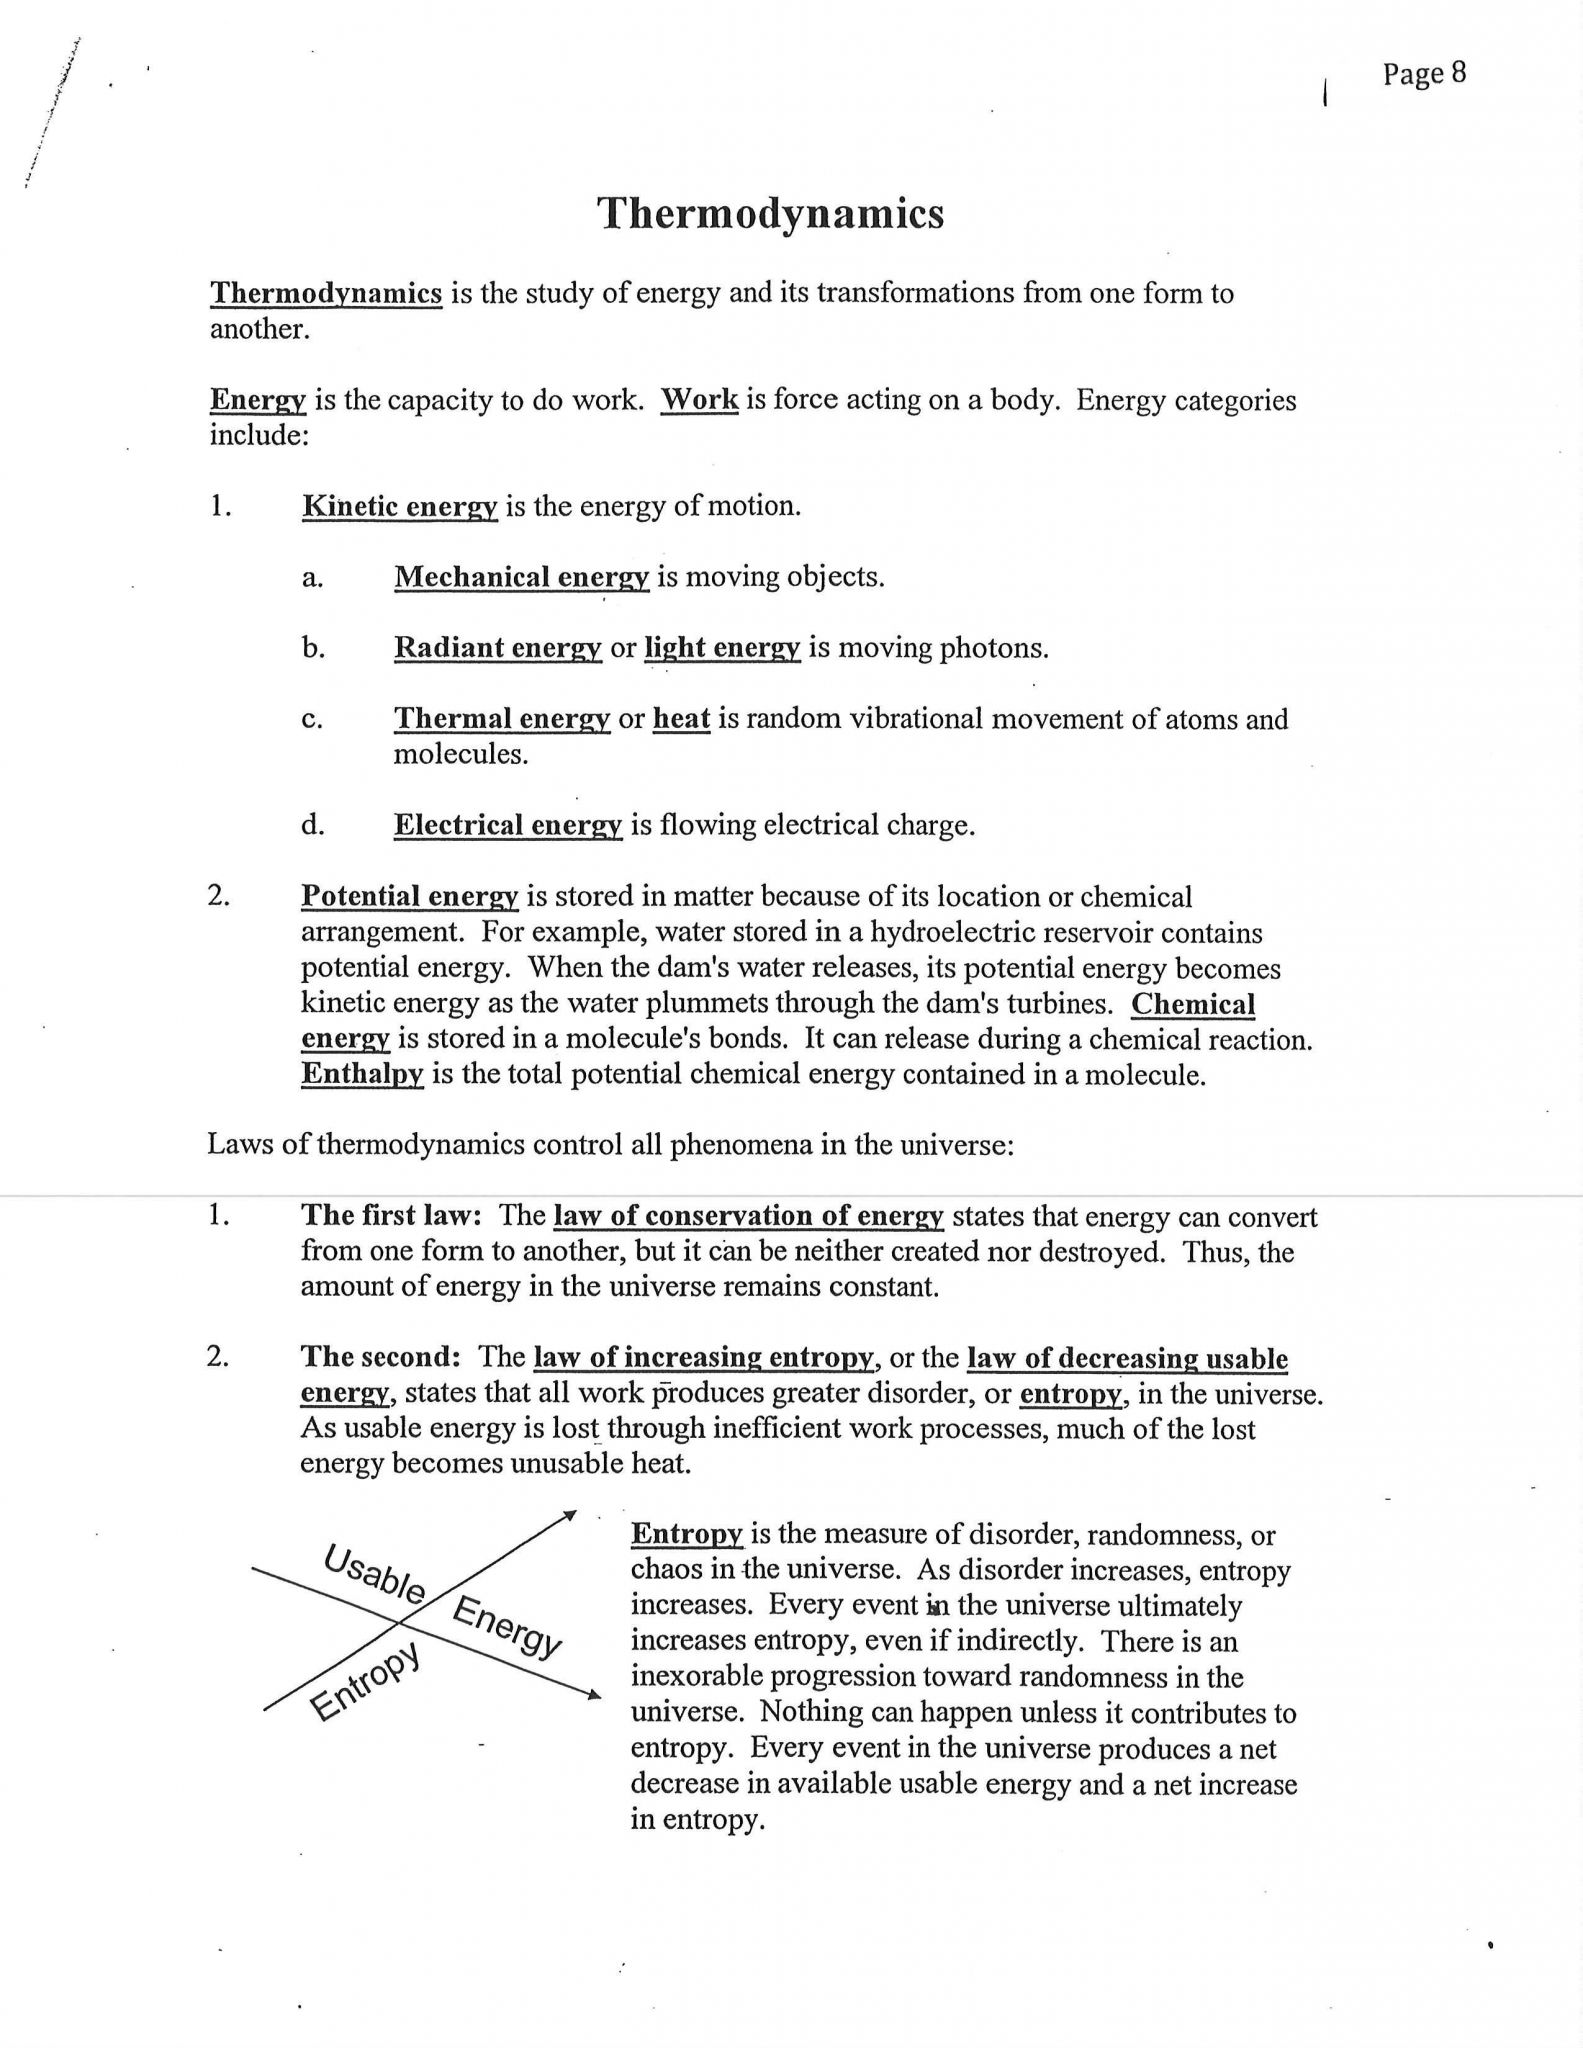 Potential Energy Worksheet Answers or Free Worksheets Library Download and Print Worksheets